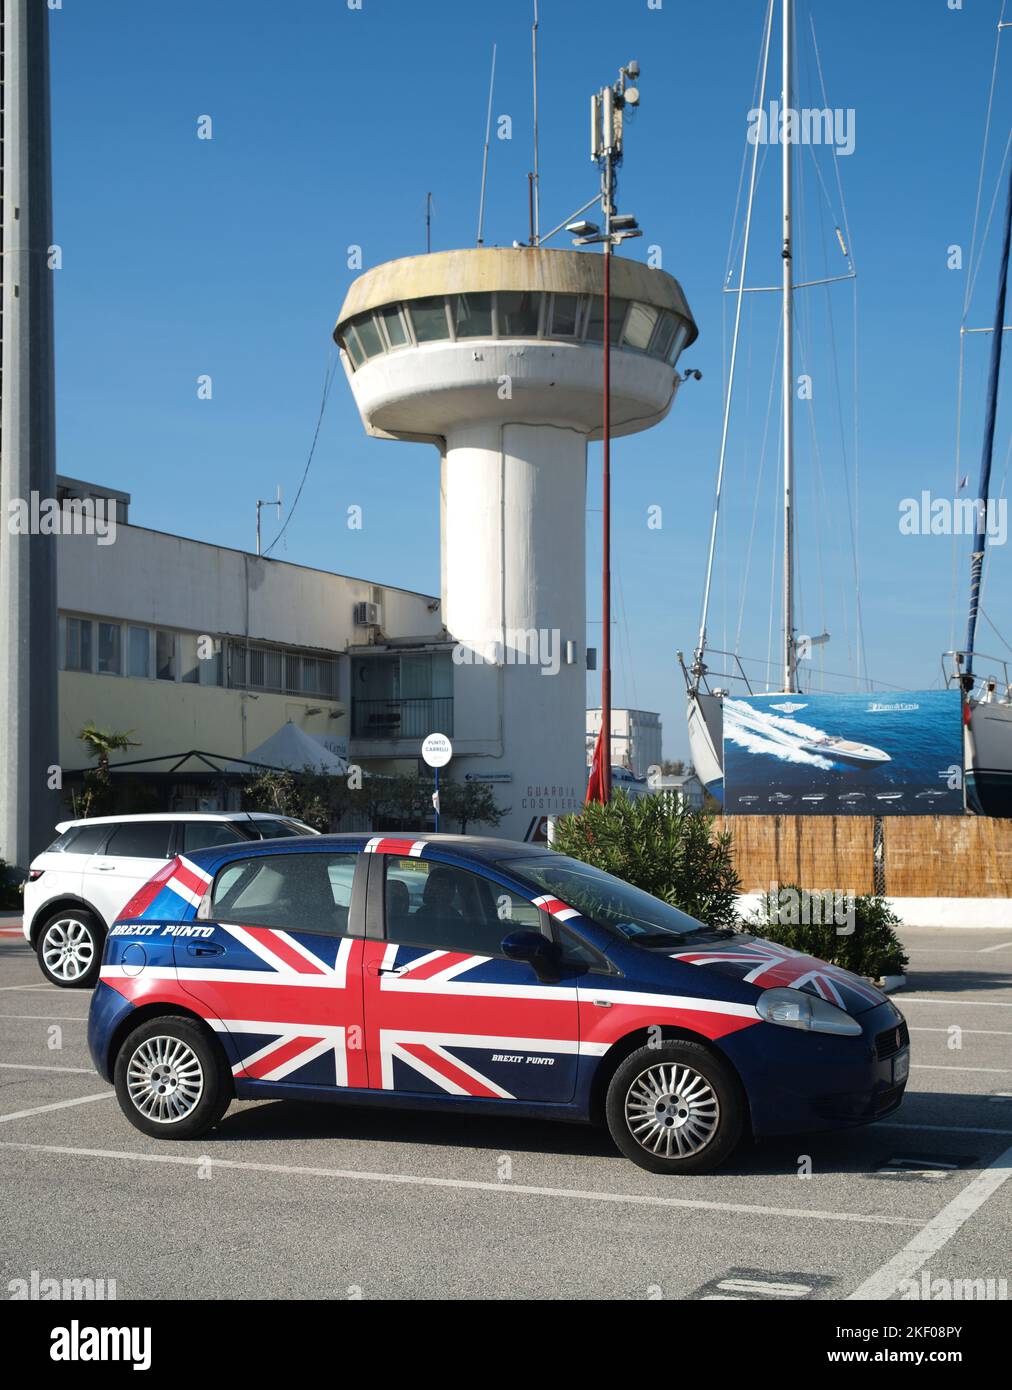 This Fiat Punto car has been converted into a Brexit Punto. Evidently everything makes a show. Touristic Port of Cervia, Italy. Stock Photo